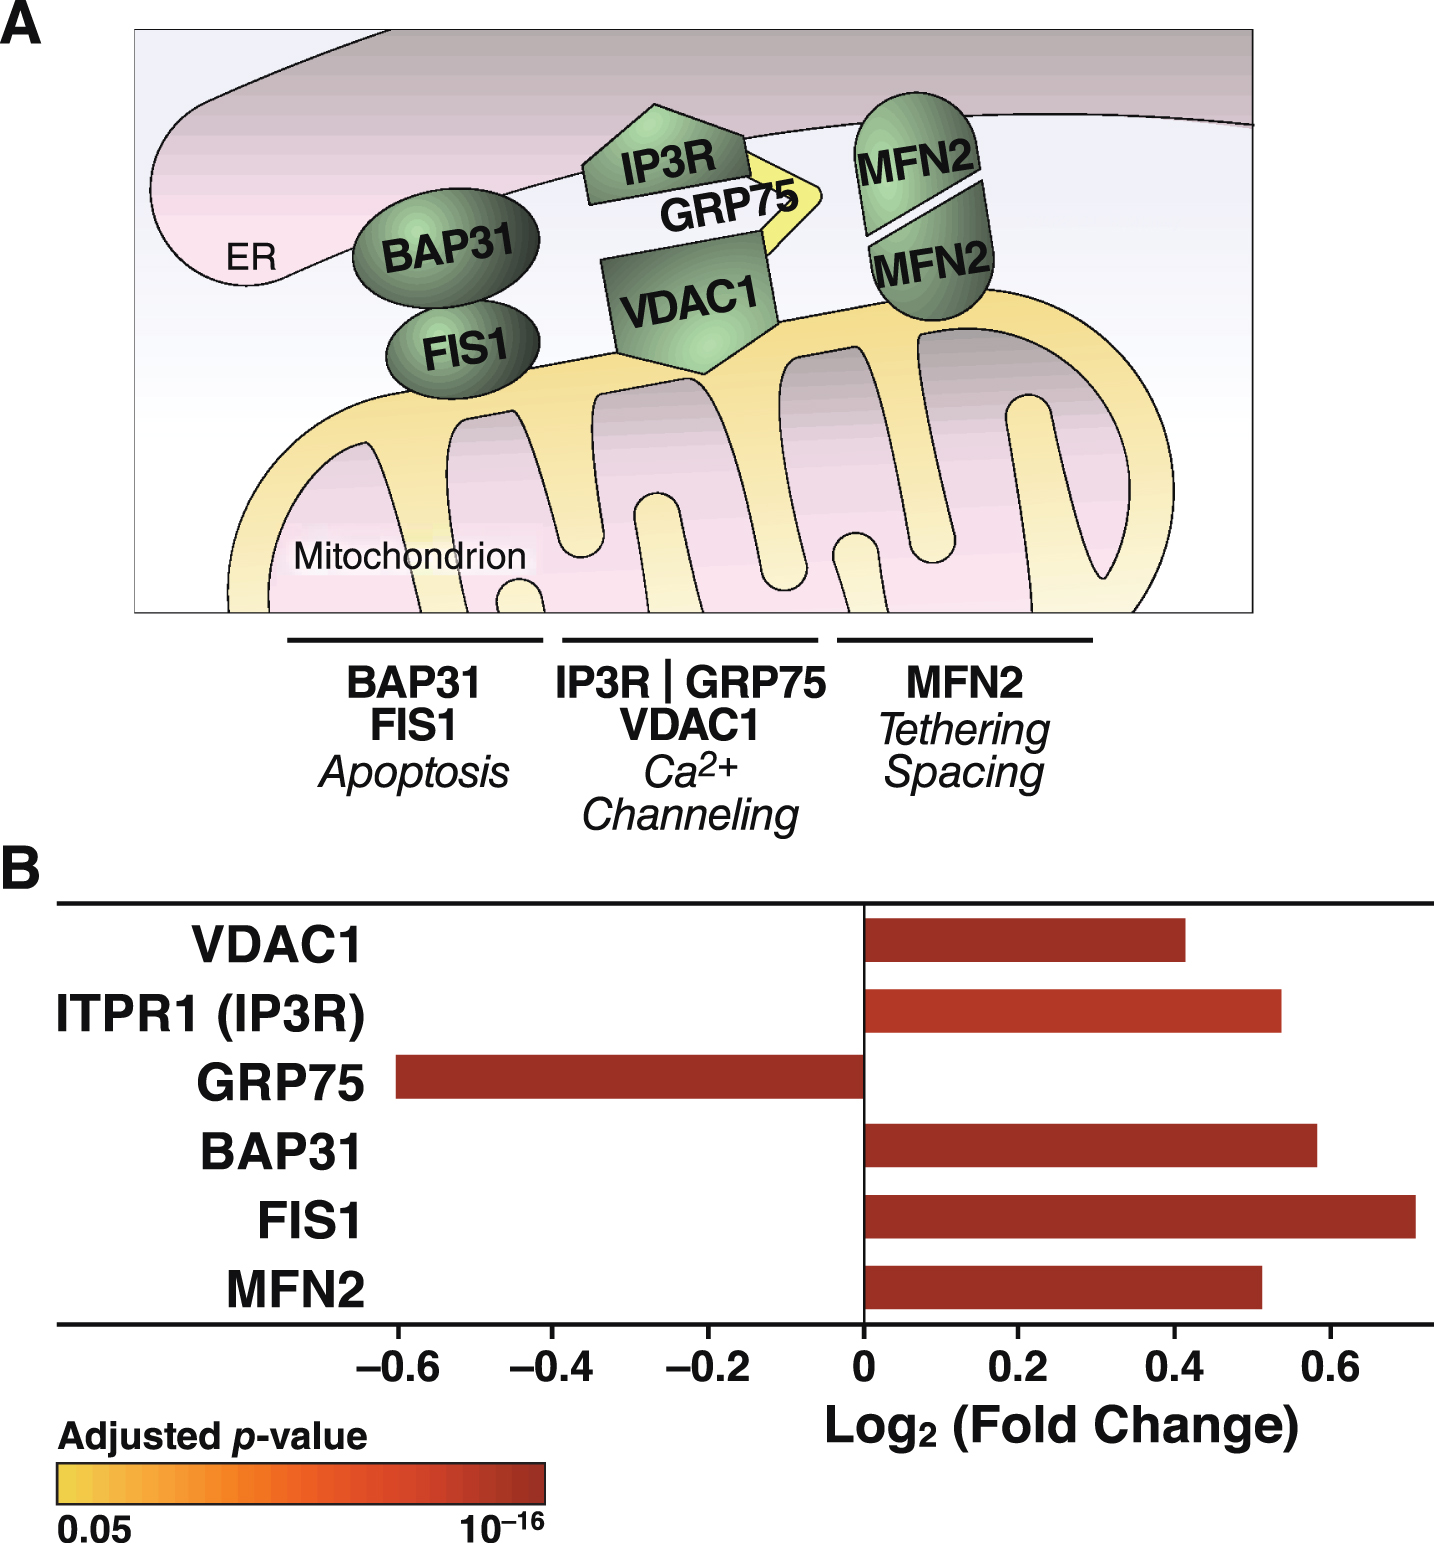 ApoE4 alters the expression of proteins involved in tethering mitochondria to the ER. A) Schematic representation of links between mitochondrial and ER-resident proteins and their reported roles in organelle and cellular physiology. B) Summary of ER-mitochondrial contact proteins that were significantly altered in N2a-apoE4 cells. Bar colors indicate p values for differences in expression levels between N2a-apoE4 and N2a-apoE3 cells. FIS1, mitochondrial fission 1 protein; MFN2, mitofusin 2.